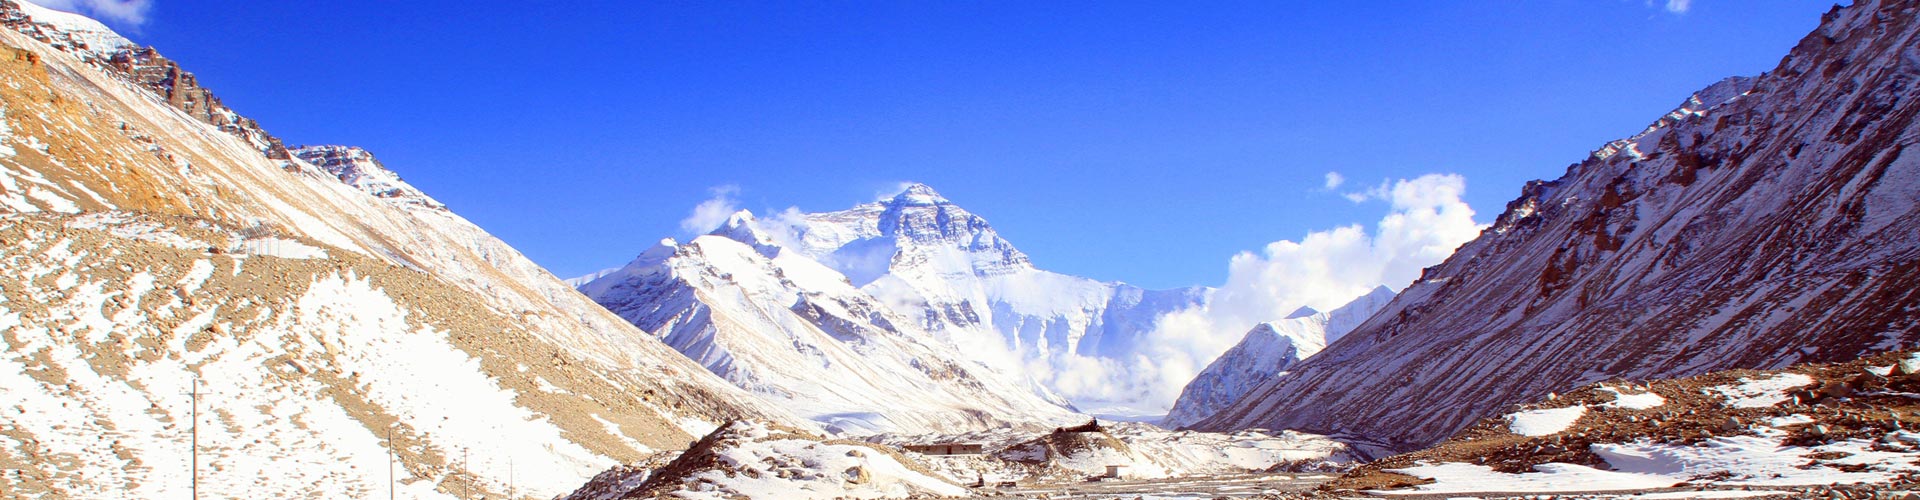 8-Day Tick off Your Everest Bucket List in Holy Tibet